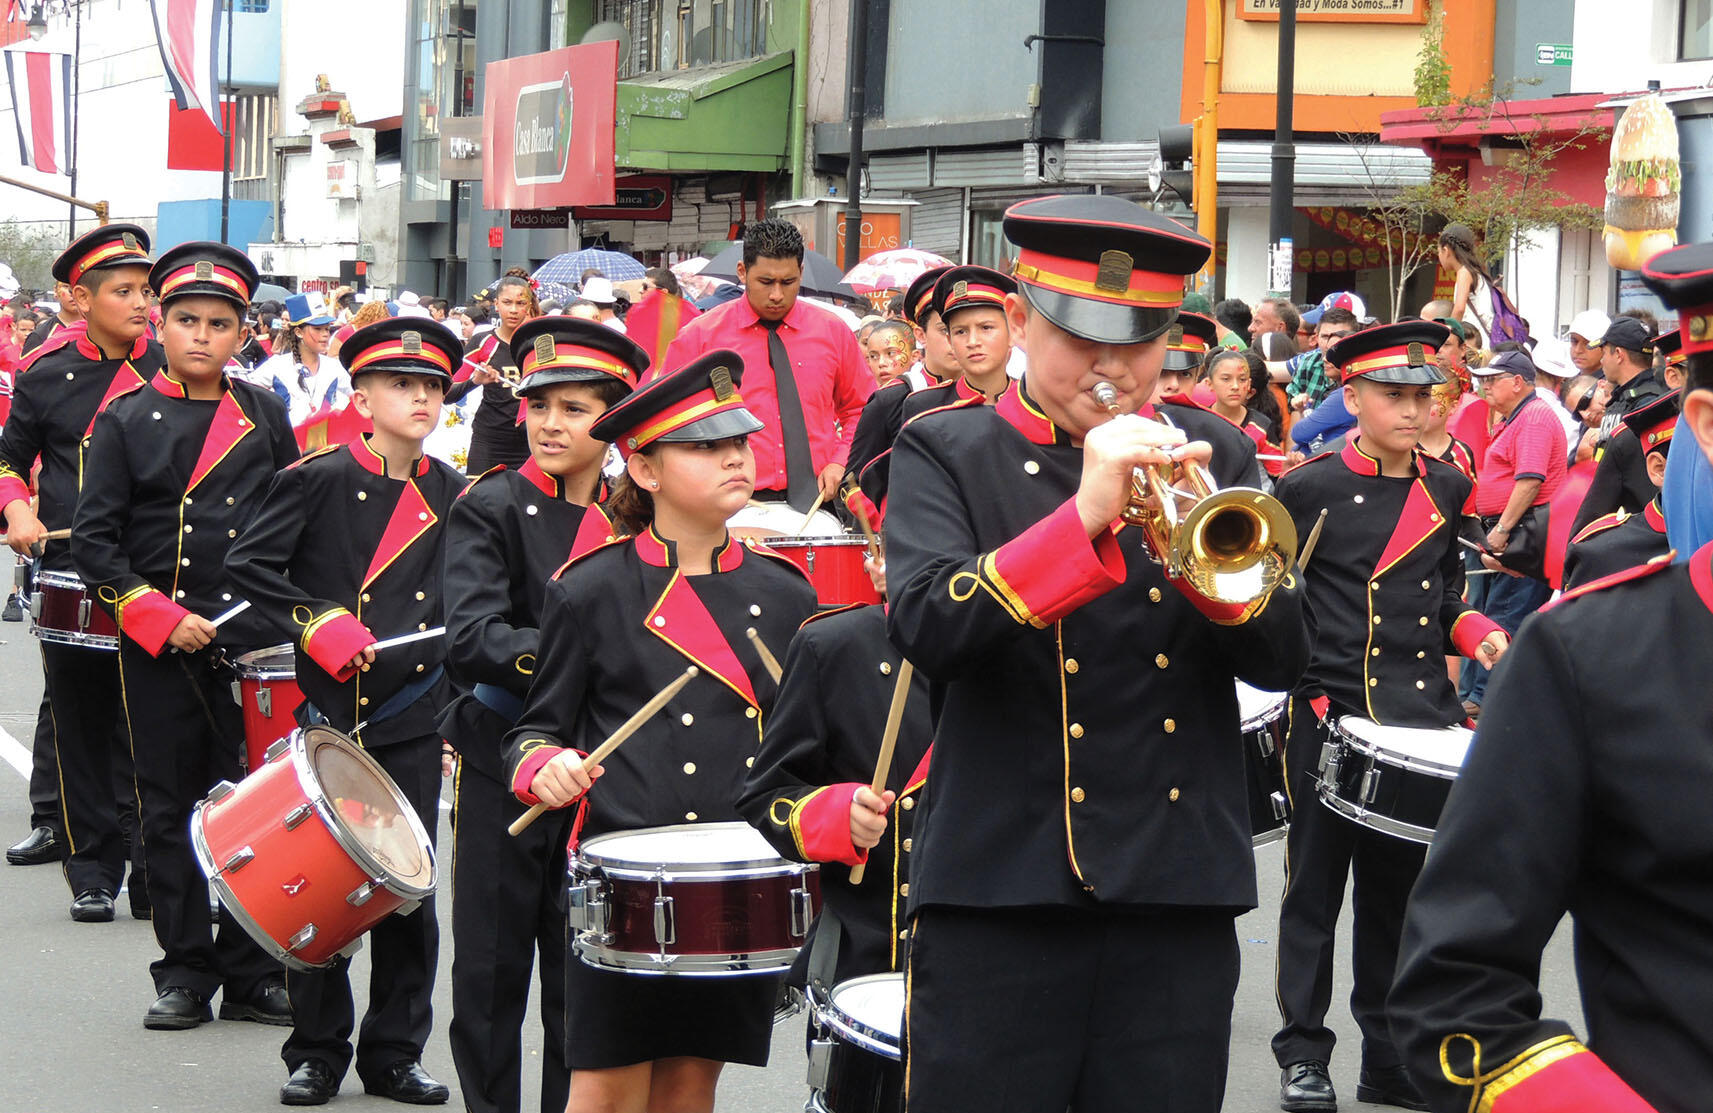 A children’s marching band plays and marches down a street in Costa Rica. (Photo by MadriCR.)